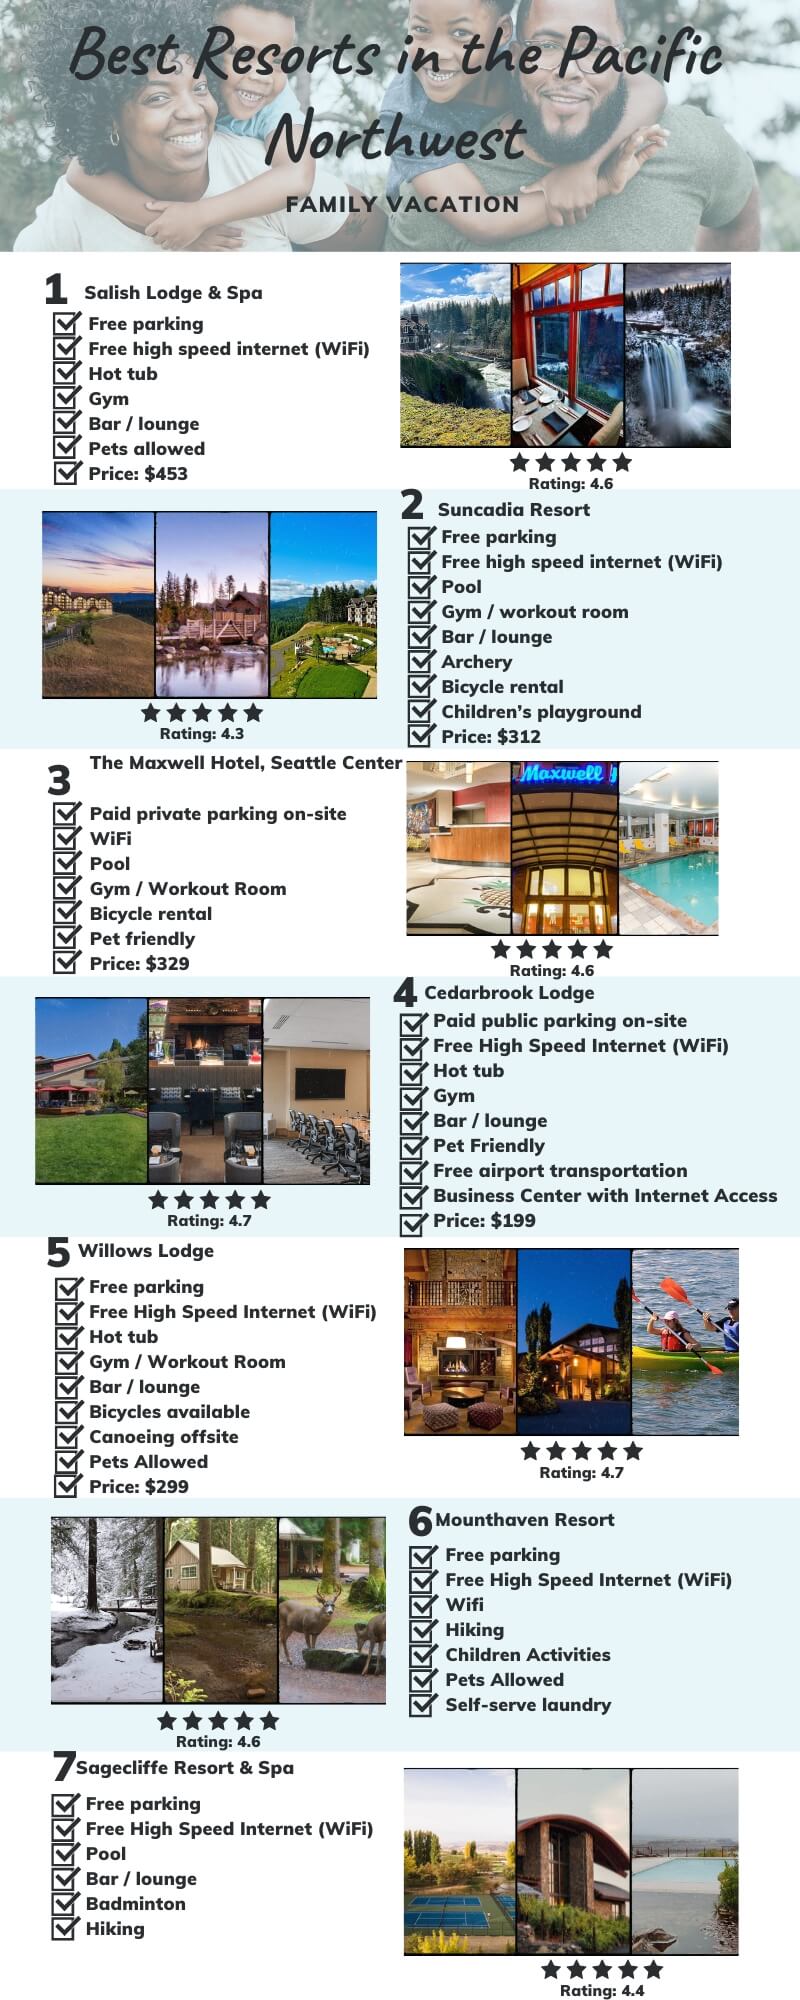 Infographic about Best Resorts for family vacation in Pacific Northwest